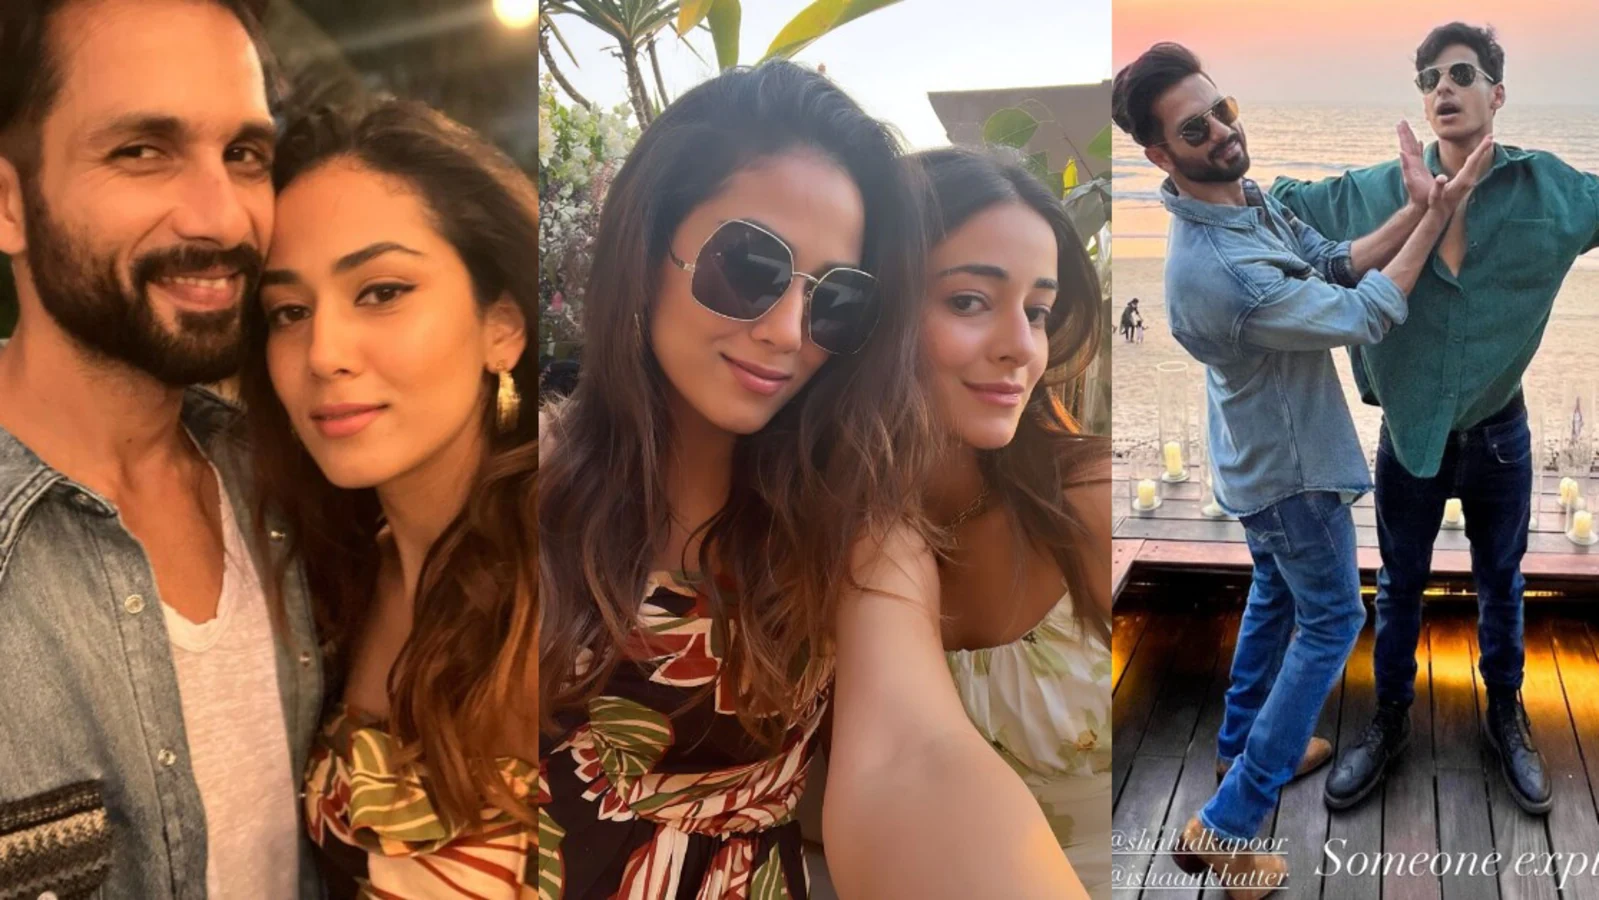 Inside Shahid Kapoor’s 41st birthday bash: Mira Rajput poses with Ishaan Khatter’s GF Ananya Panday. home gets decked up